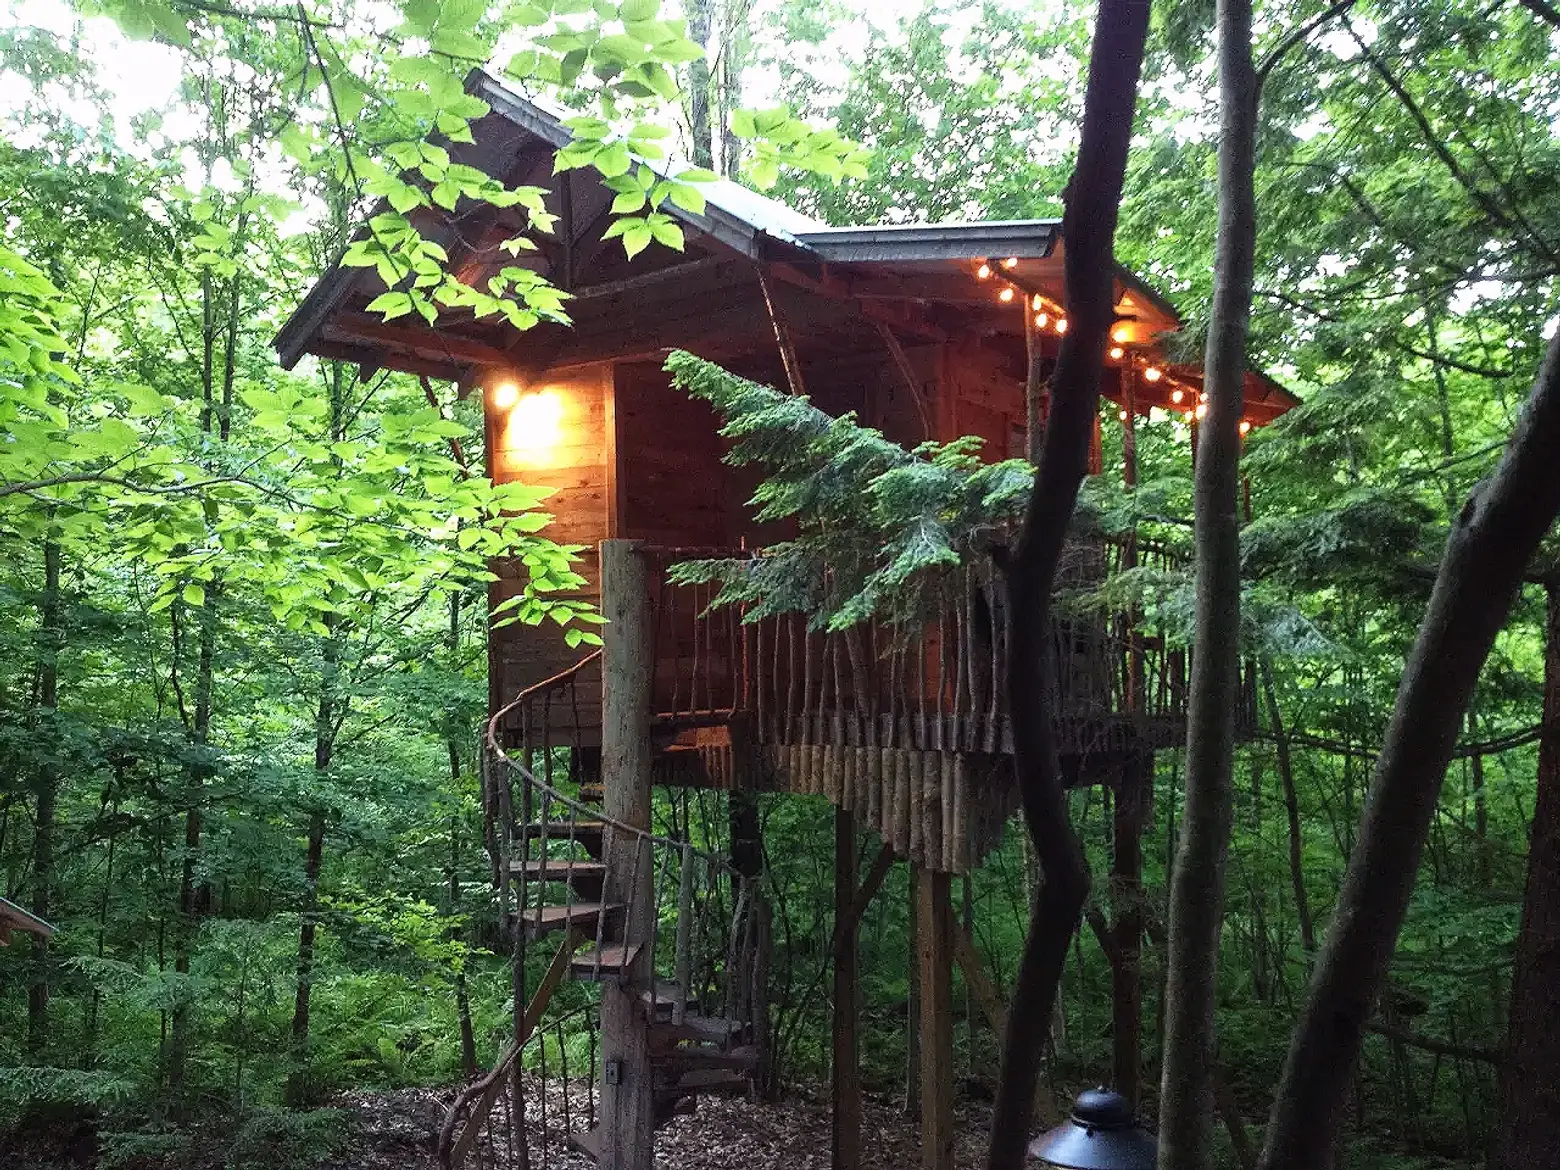 Stay in an Adirondack tree house retreat this summer